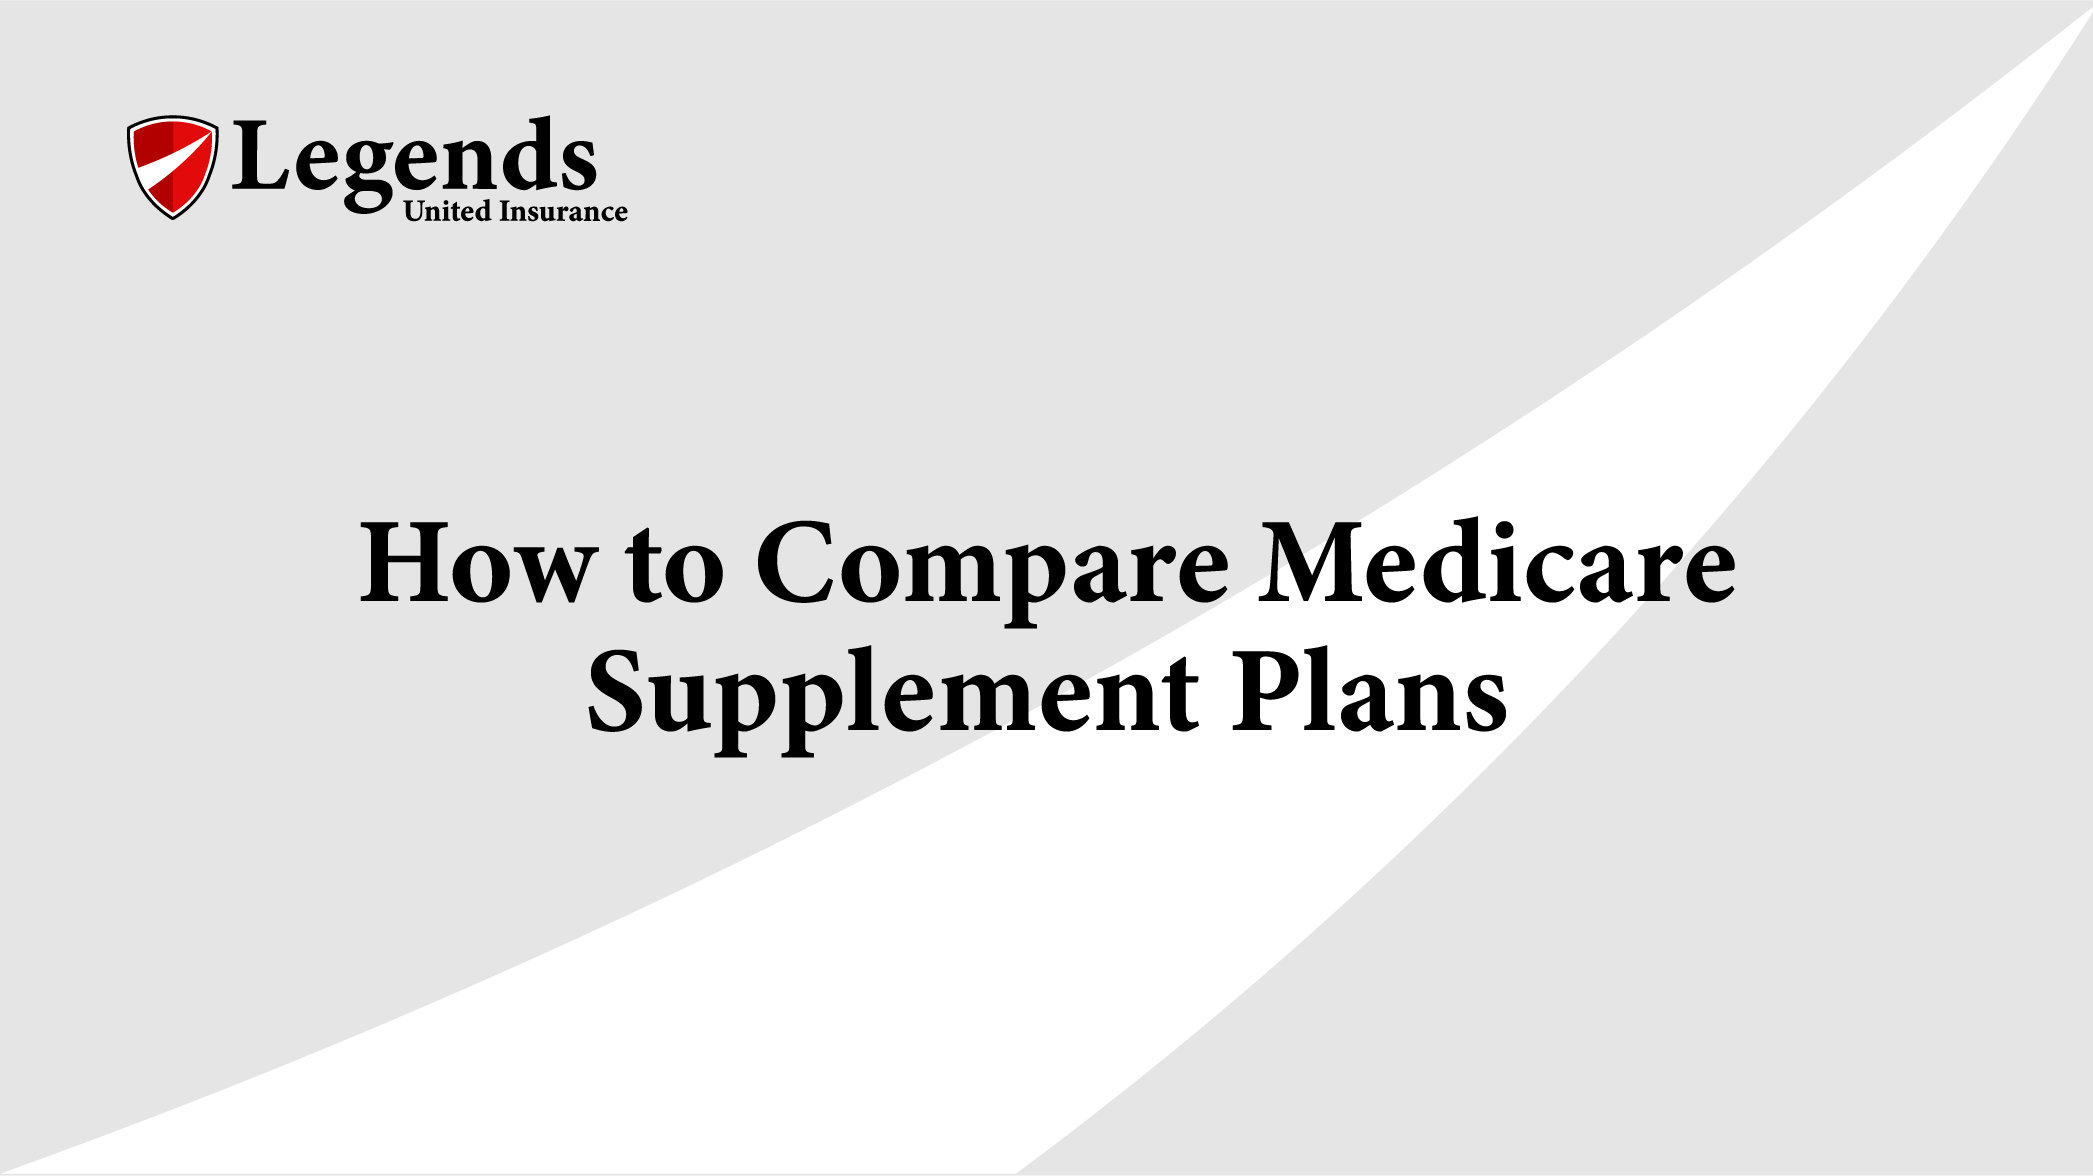 Humana Medicare Supplement Plans Review - Everyday Health